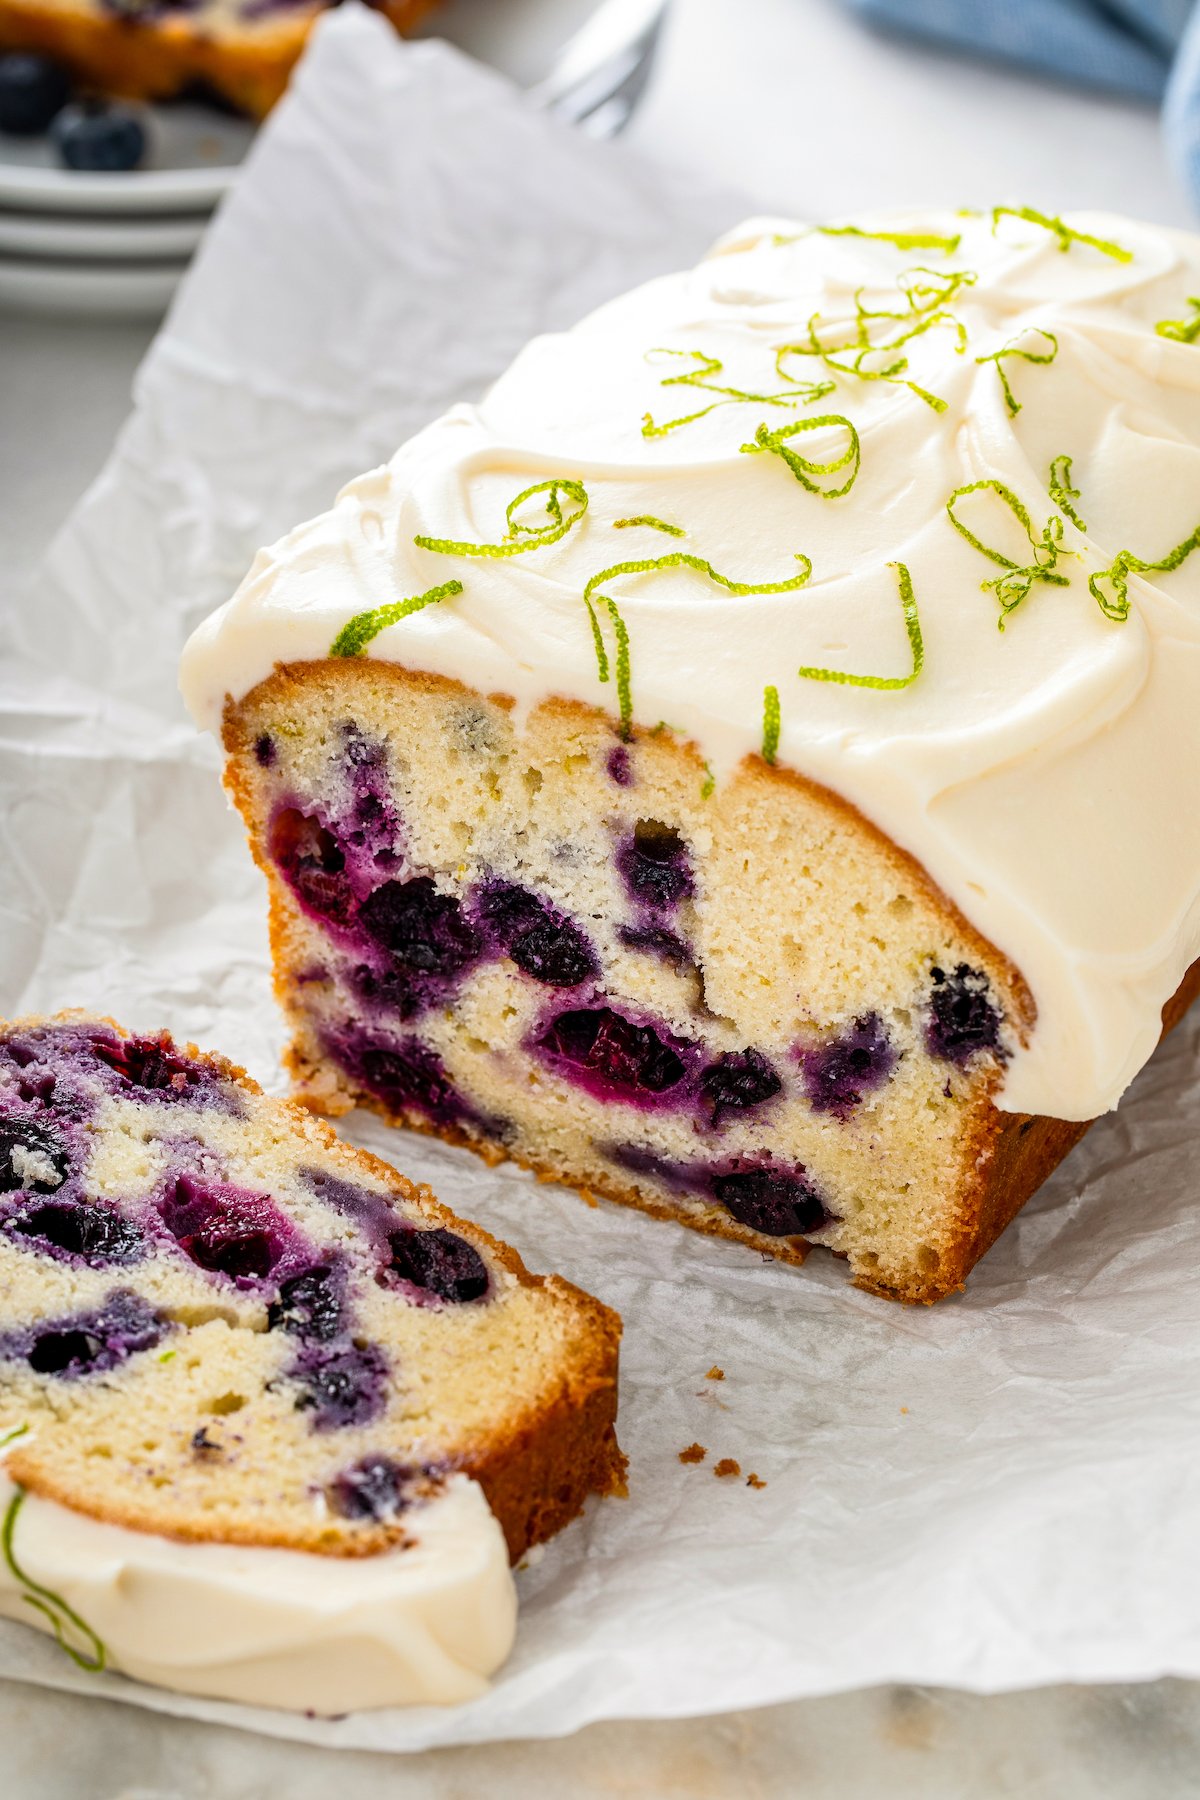 A sweet and dense lime blueberry pound cake topped with a thick layer of cream cheese frosting being sliced into pieces.